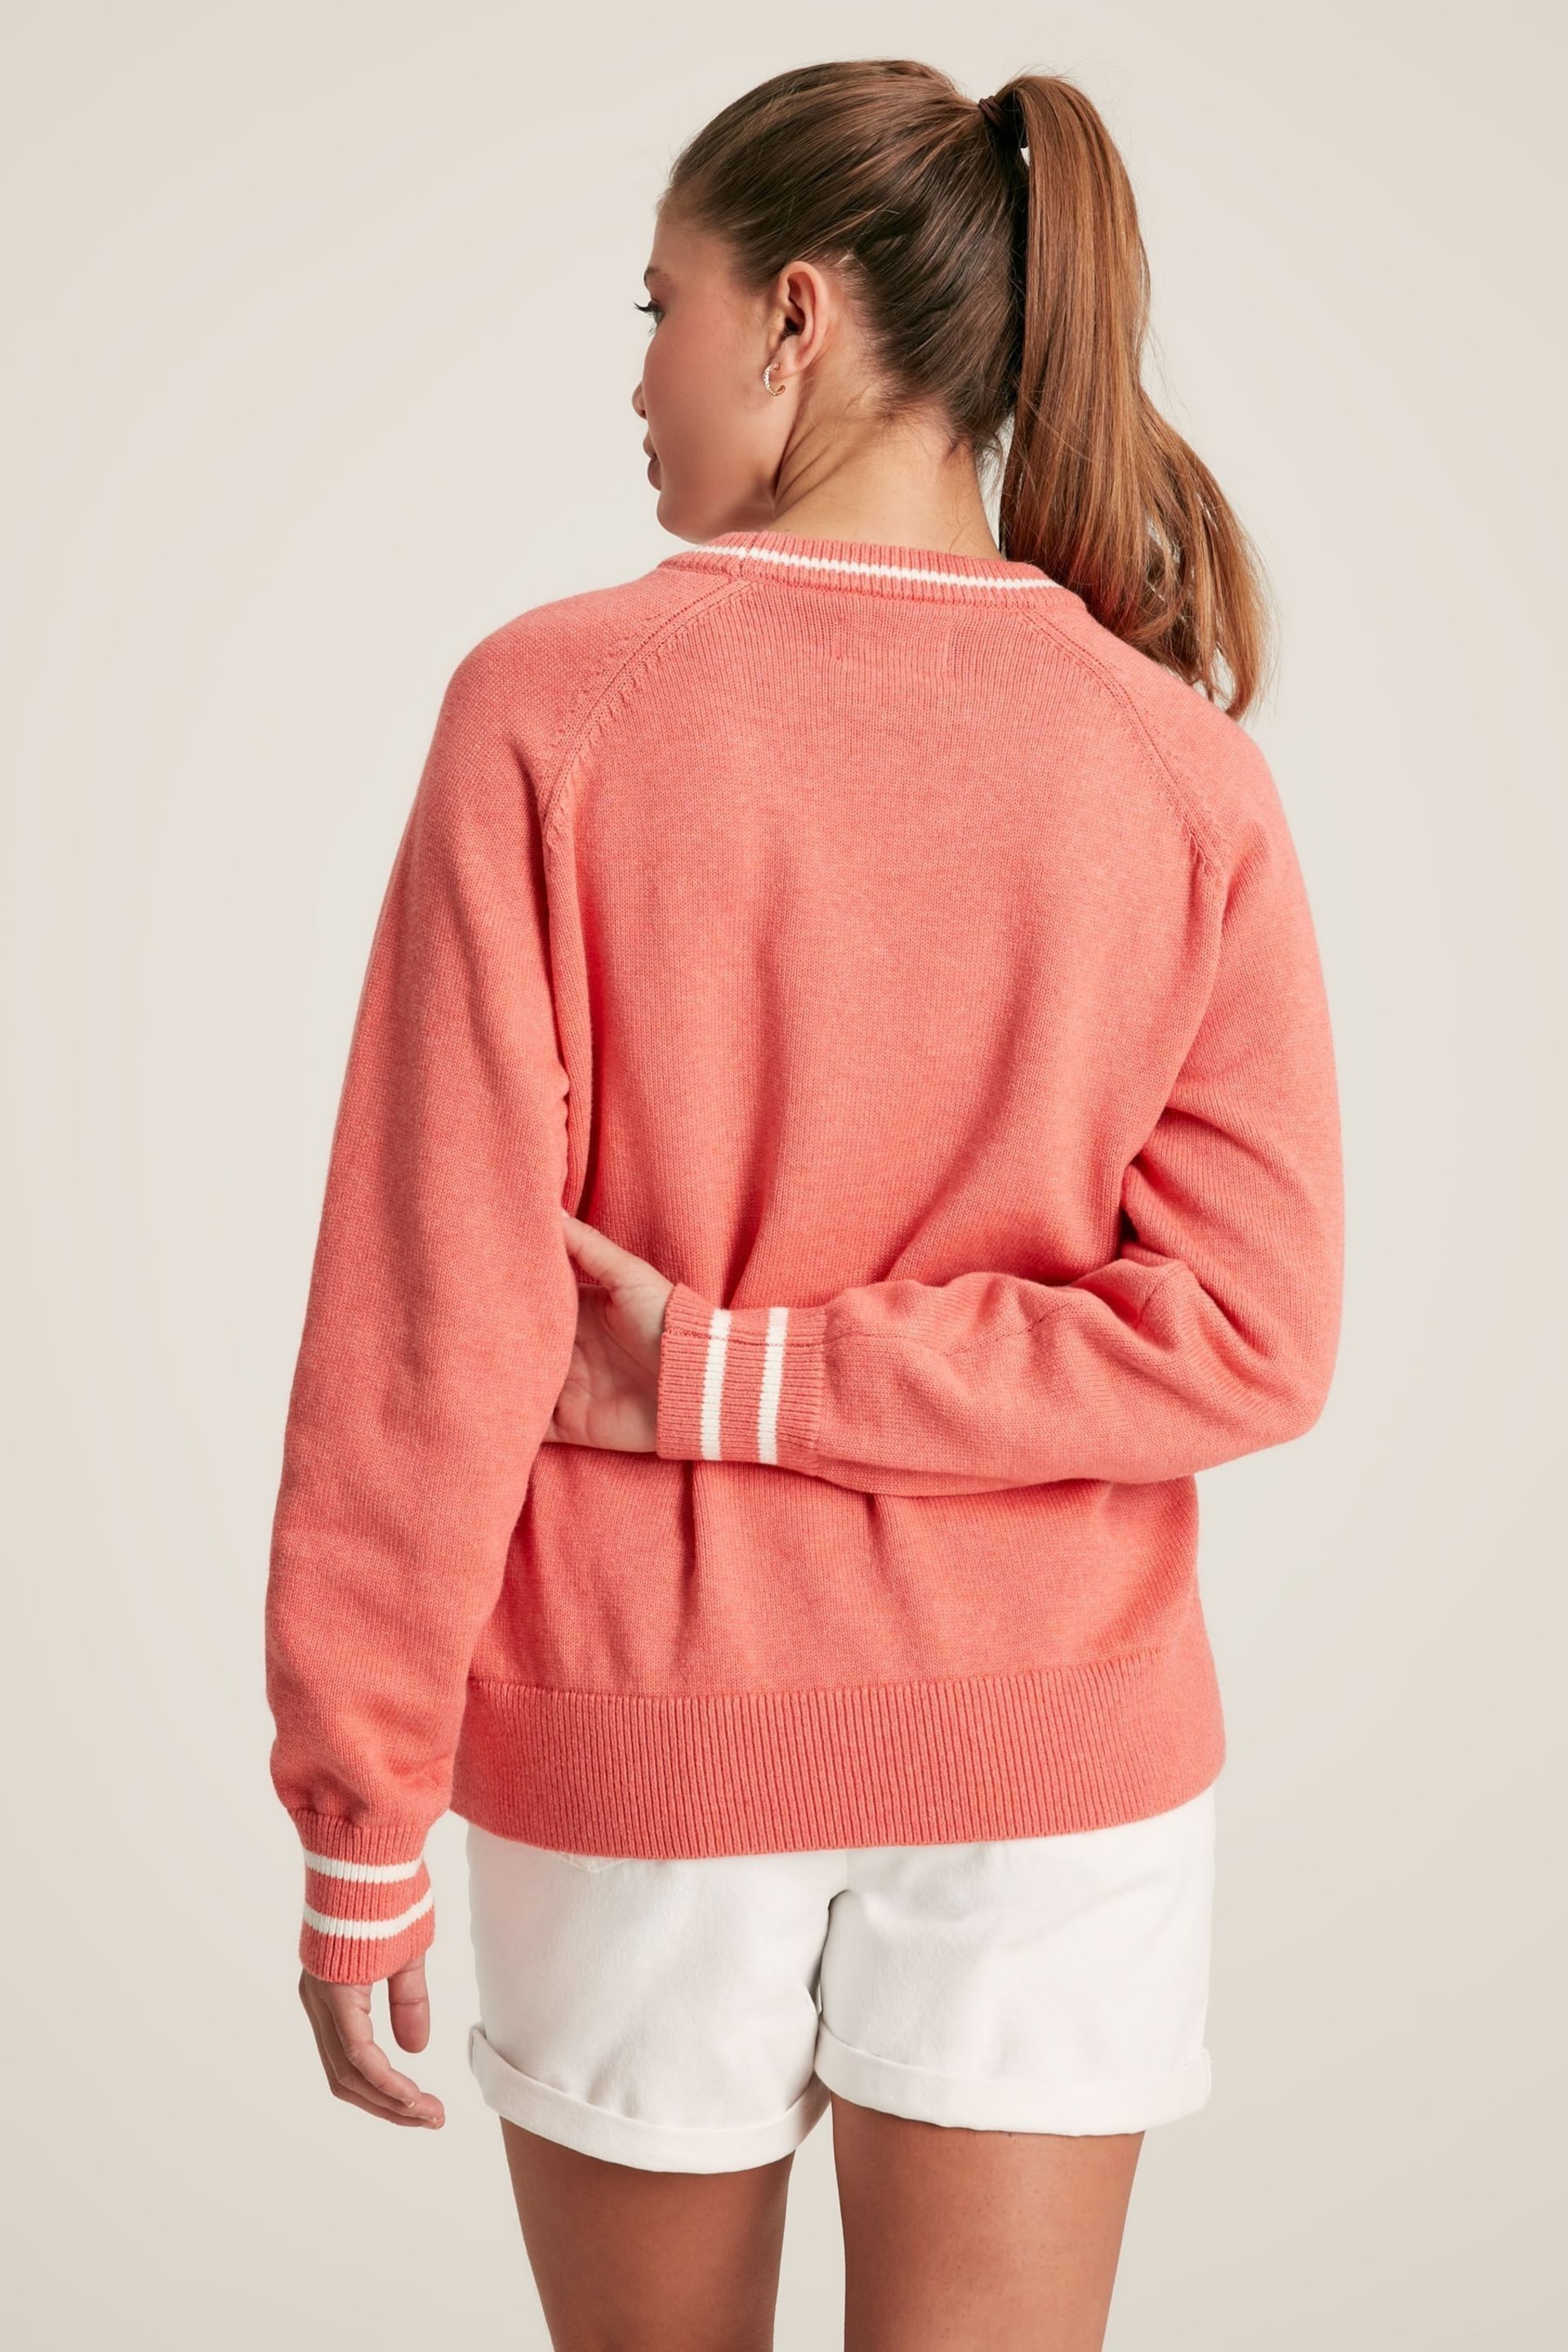 Joules Break Point Coral Knitted Tennis Jumper - Image 4 of 8